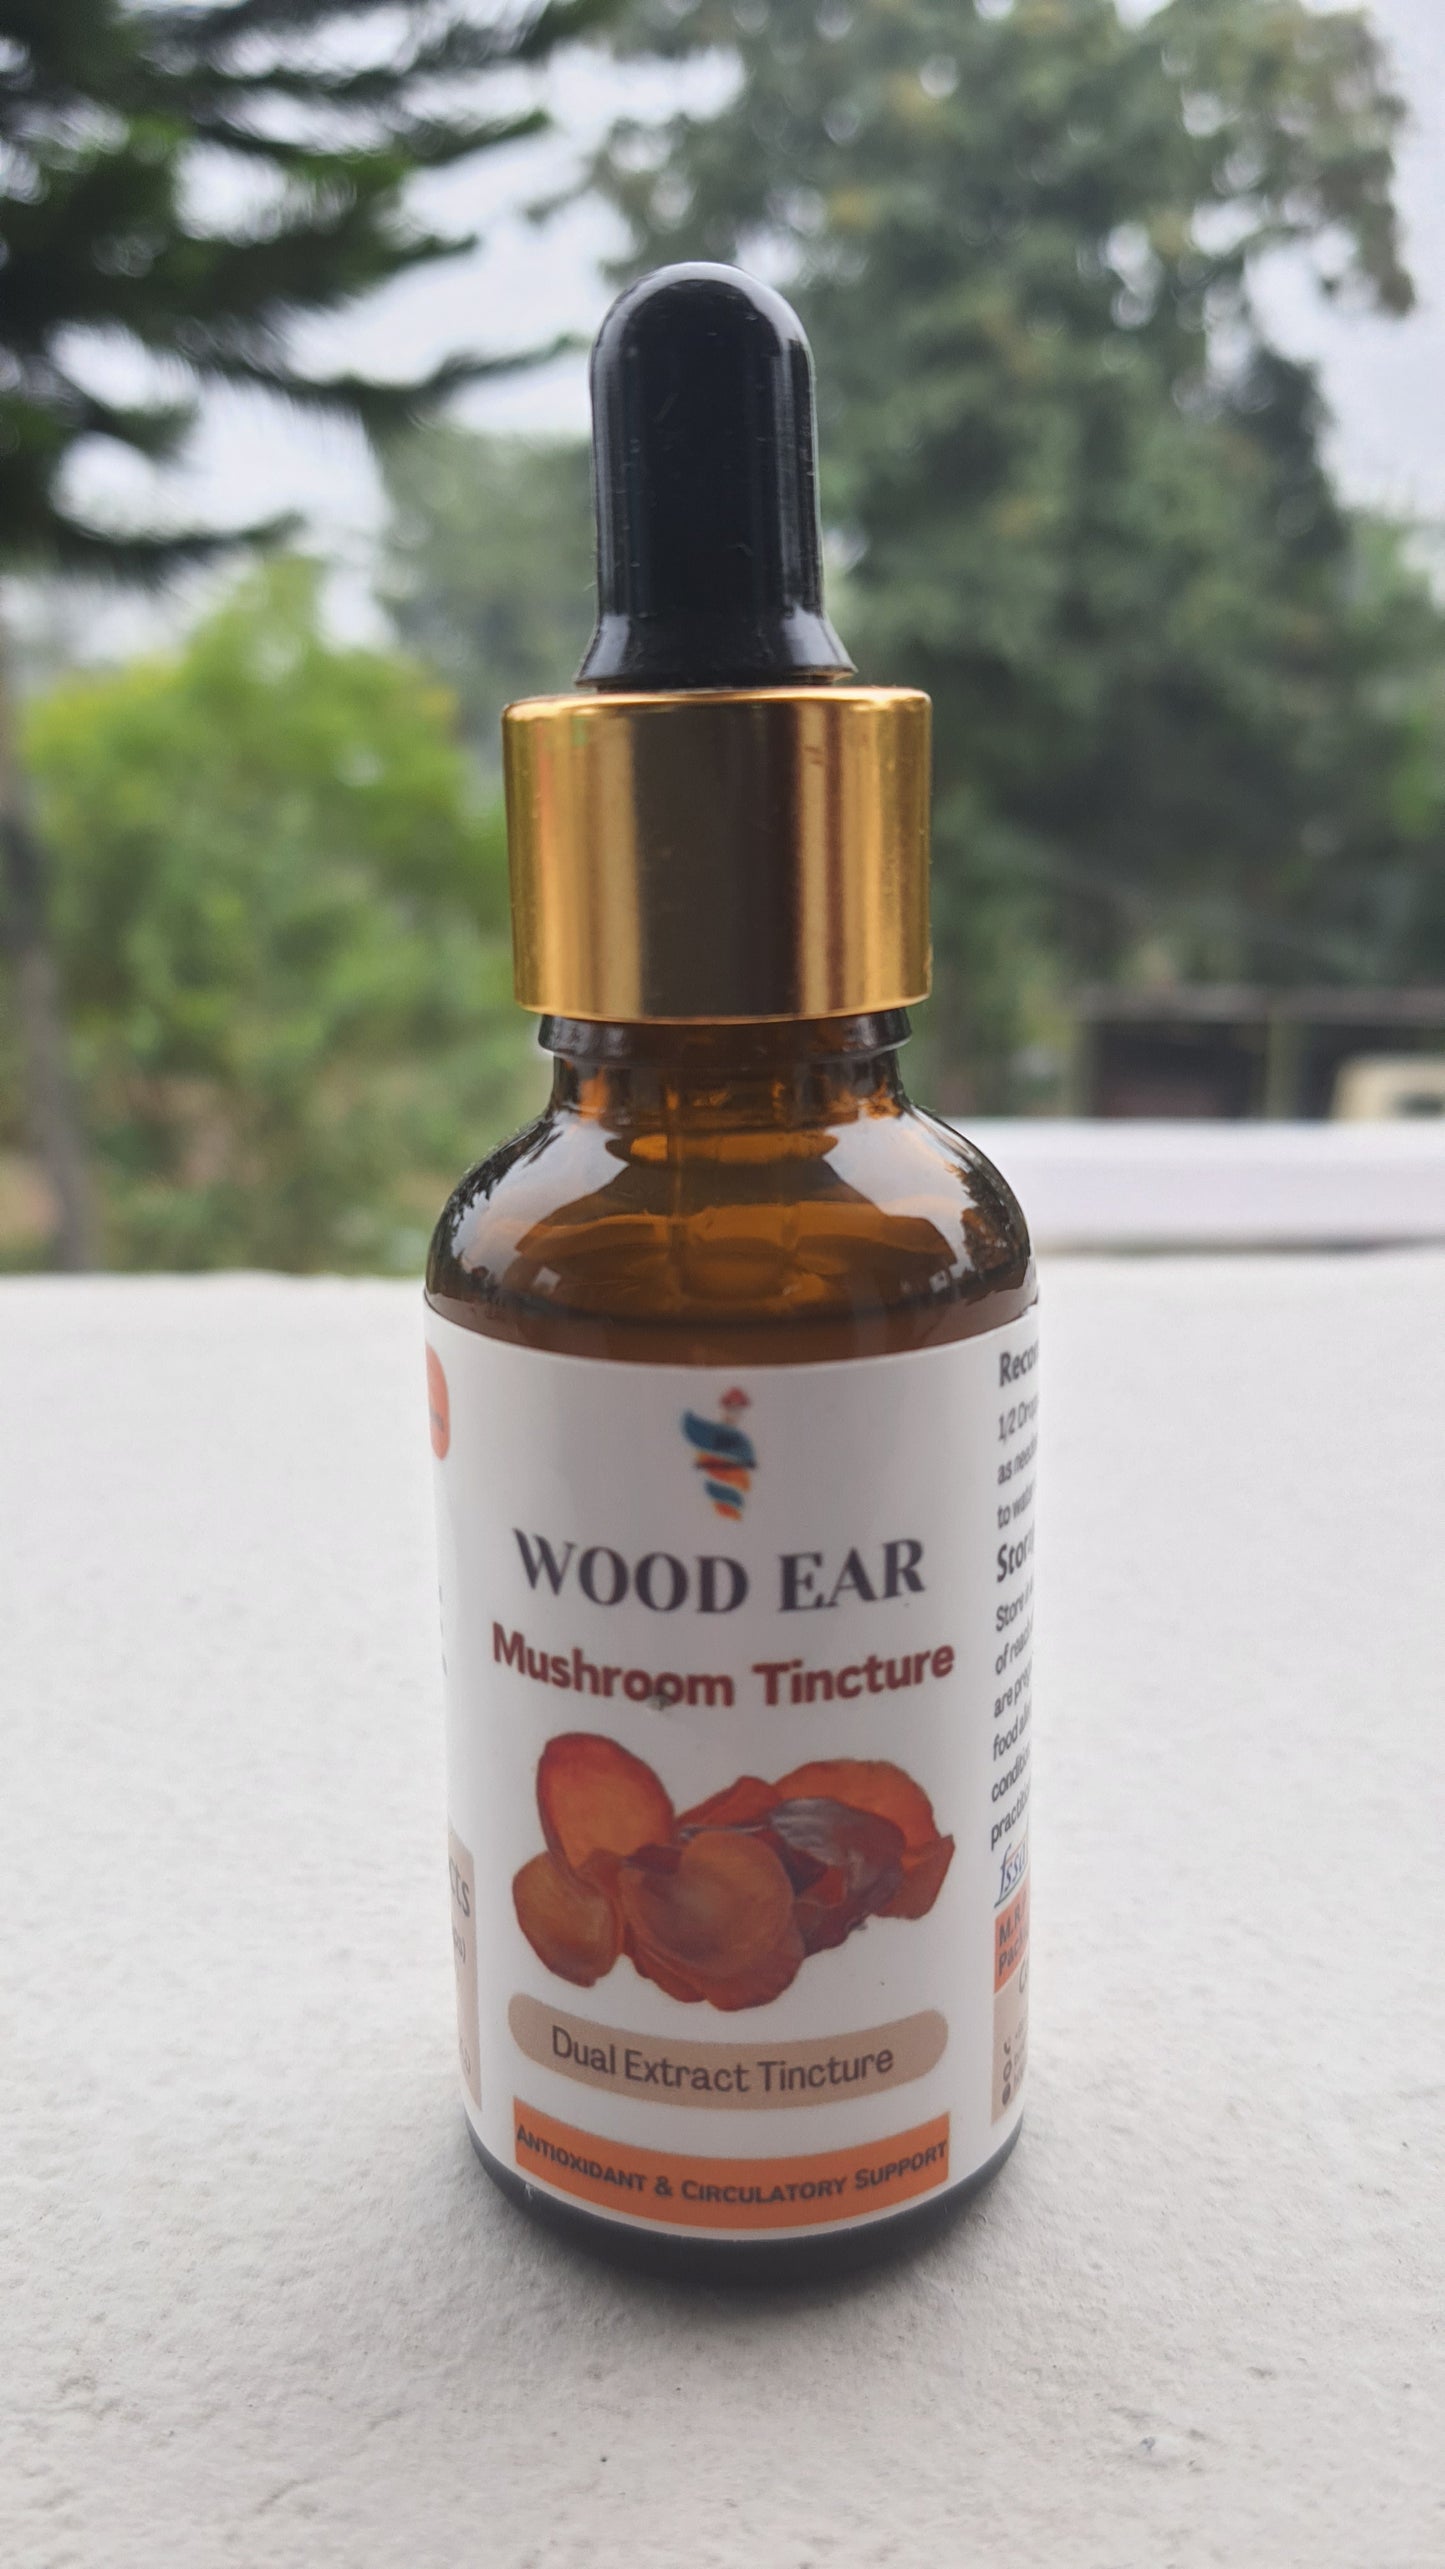 Wood Ear (Auricularia) Mushroom Extract Tincture, Supports Circulatory & Digestive Health, 30ml Bottle, 60 Servings, Natural Aid for Blood Flow and Gut Wellness, Single Pack